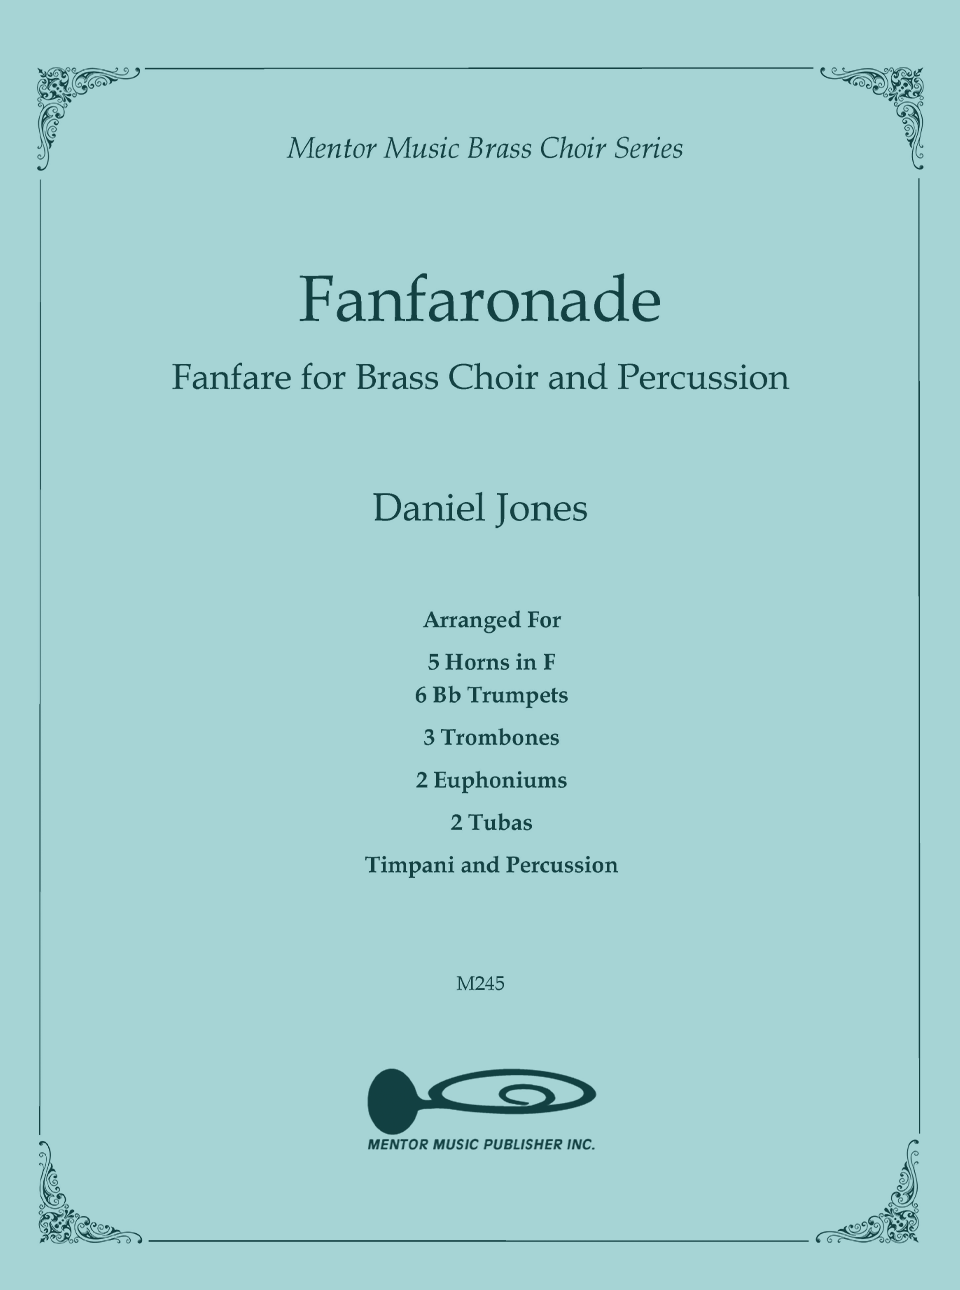 Fanfaronade for Brass Choir and Percussion